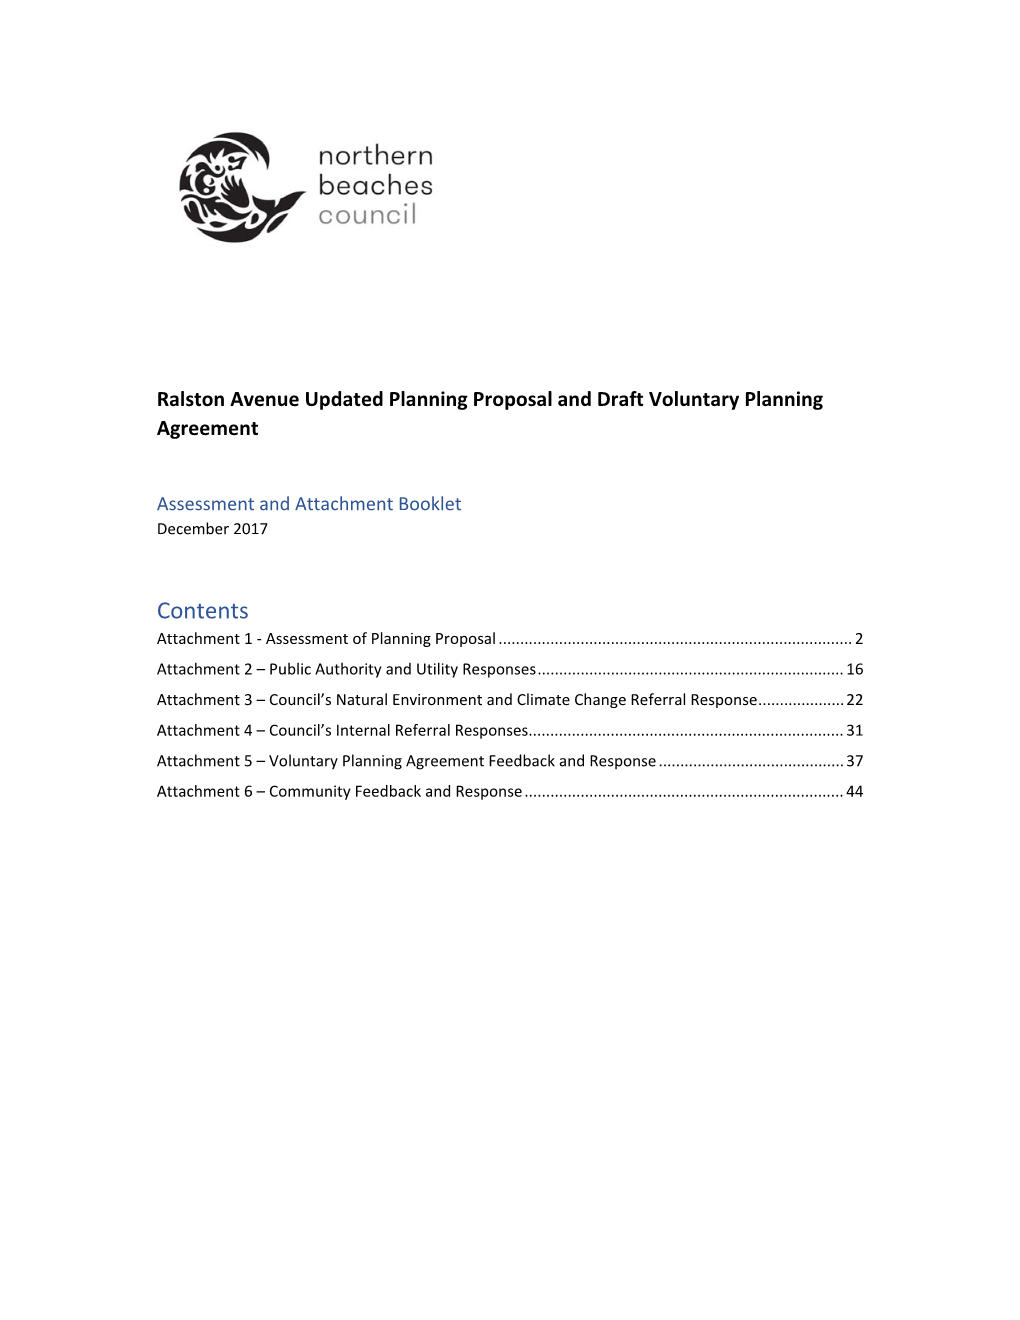 Attachment Booklet Including: 1 Planning Proposal Assessment